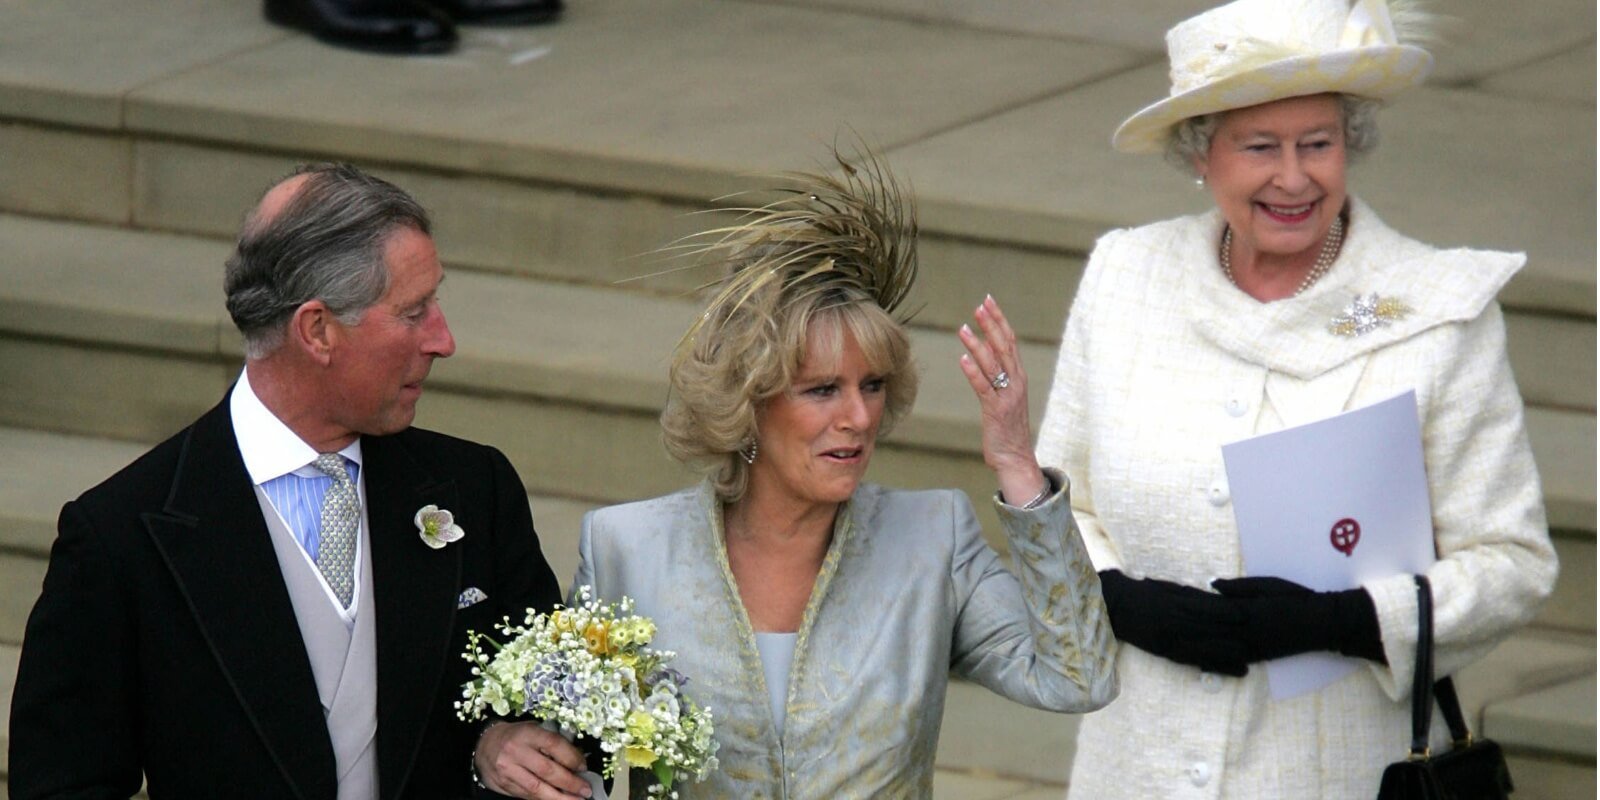 King Charles, Camilla Parker Bowles, and Queen Elizabeth photographed in 2005.